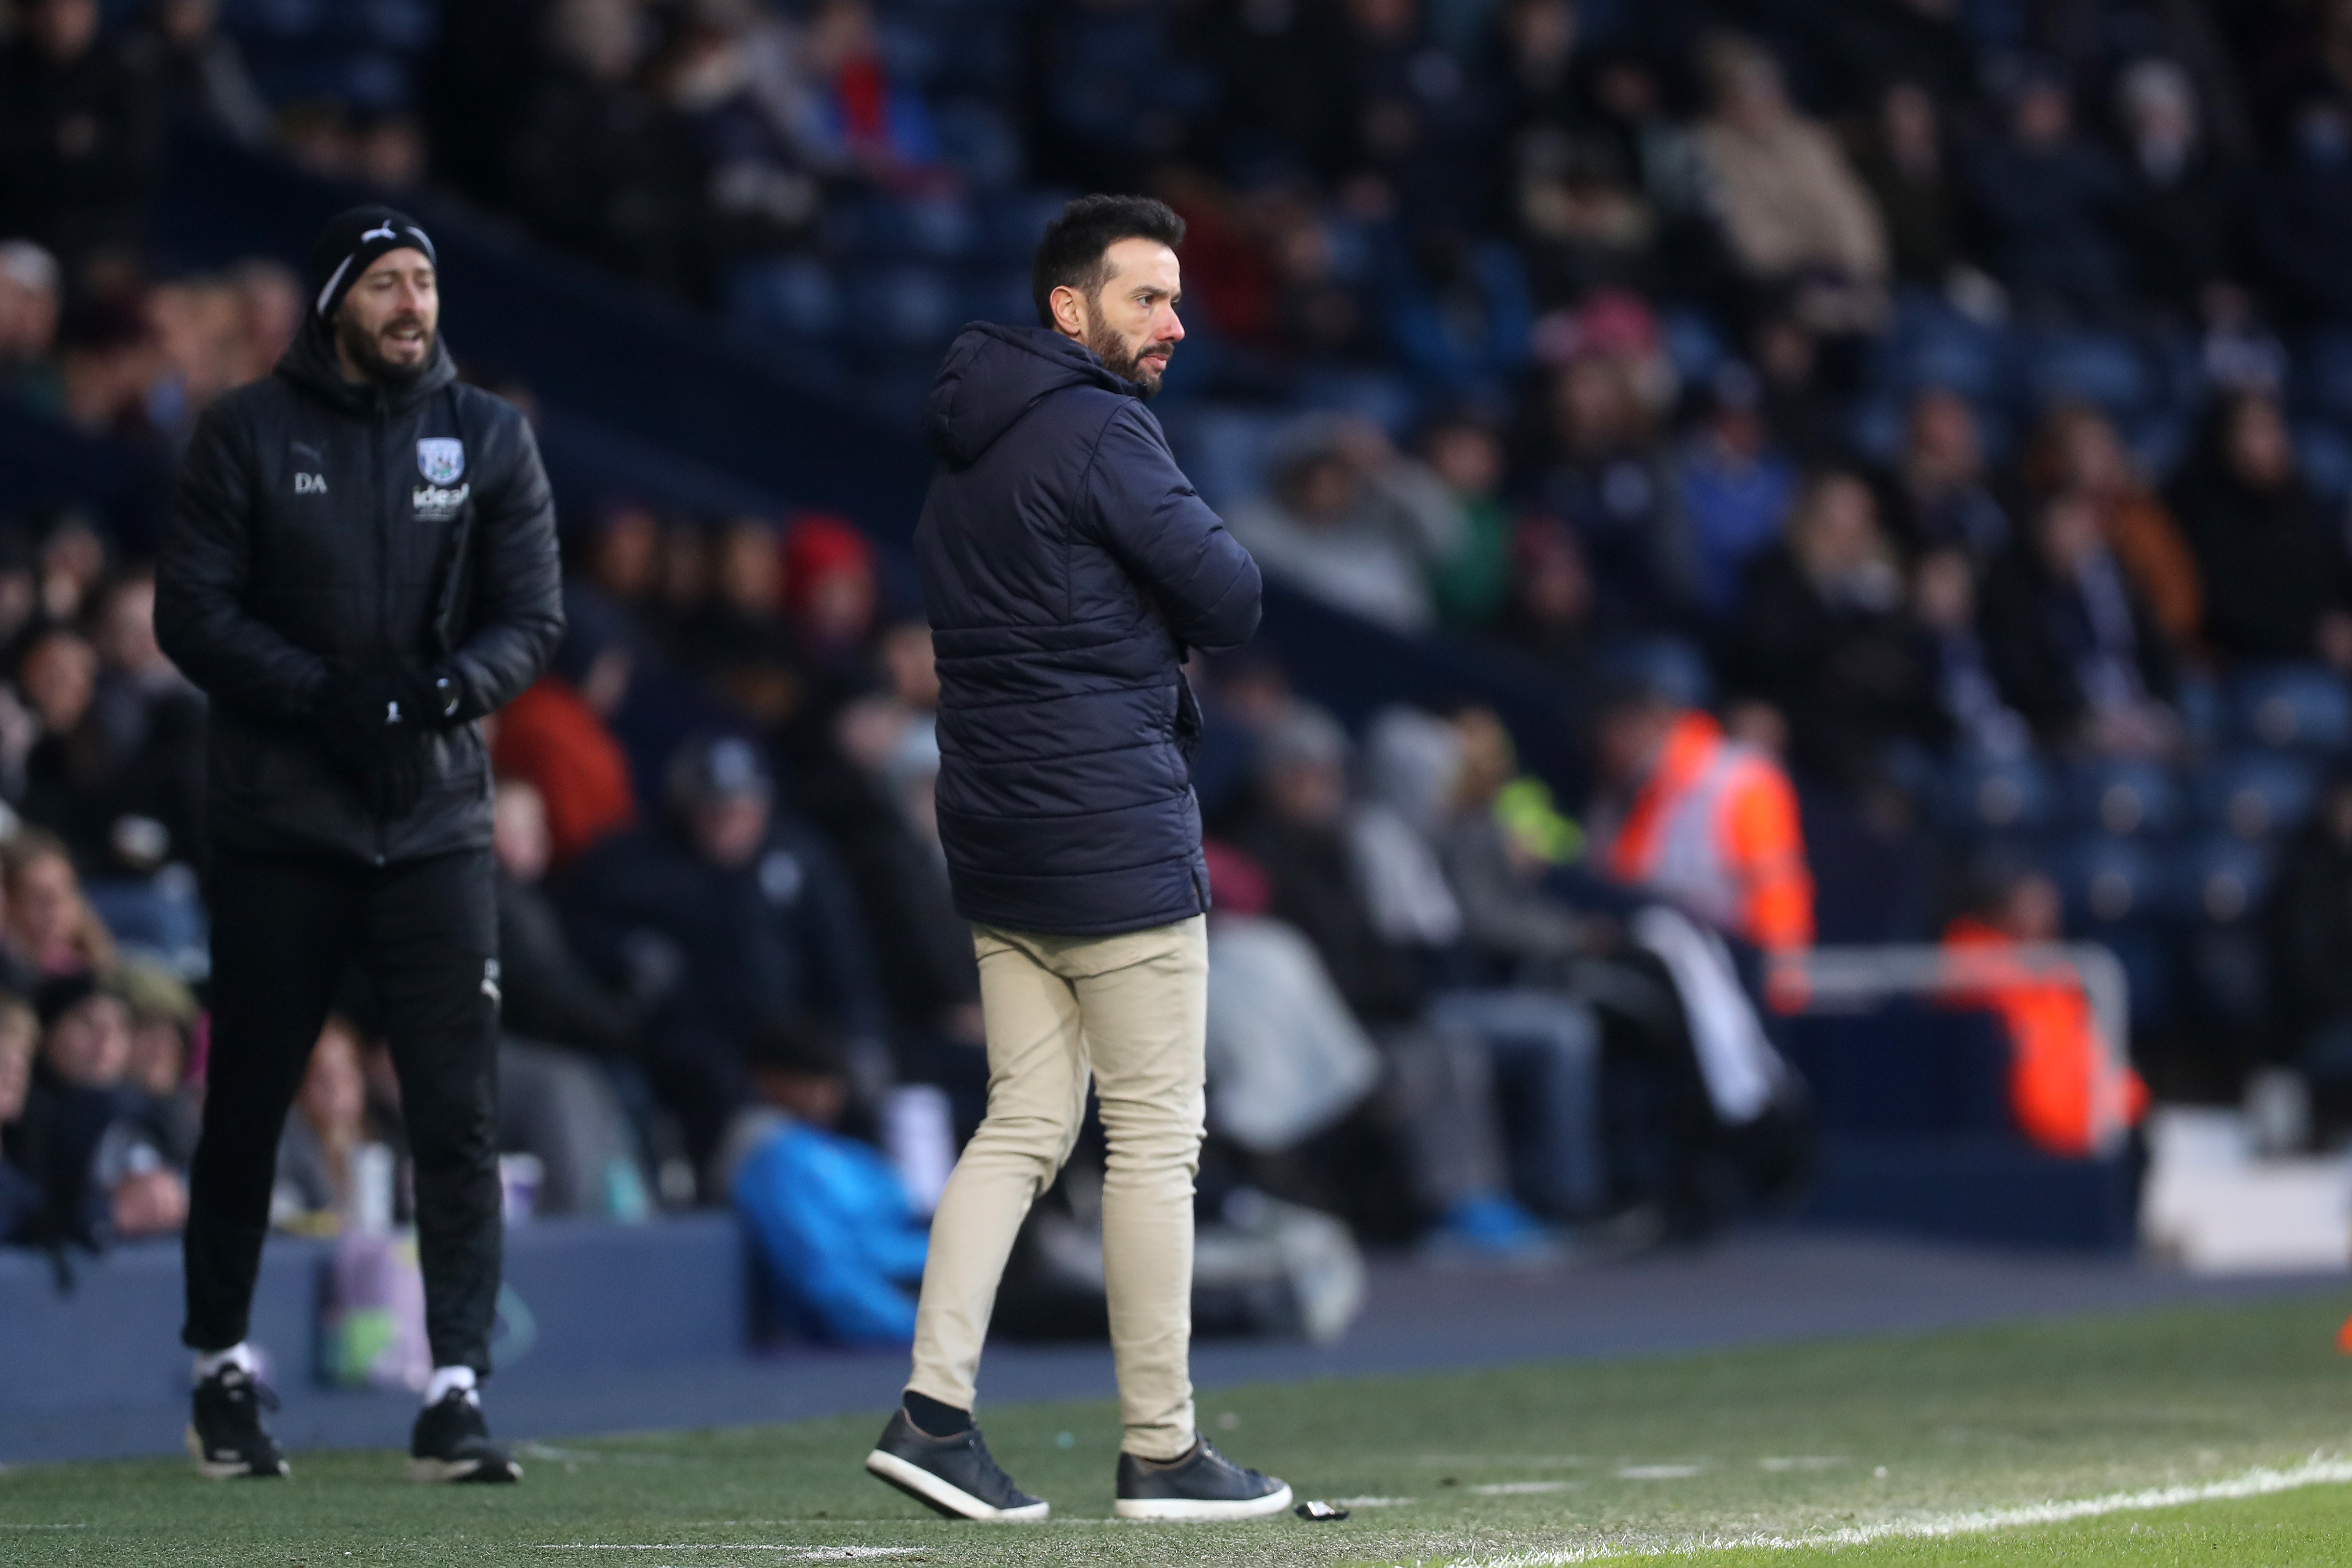 Carlos Corberán on the touchline at The Hawthorns in a middle of game